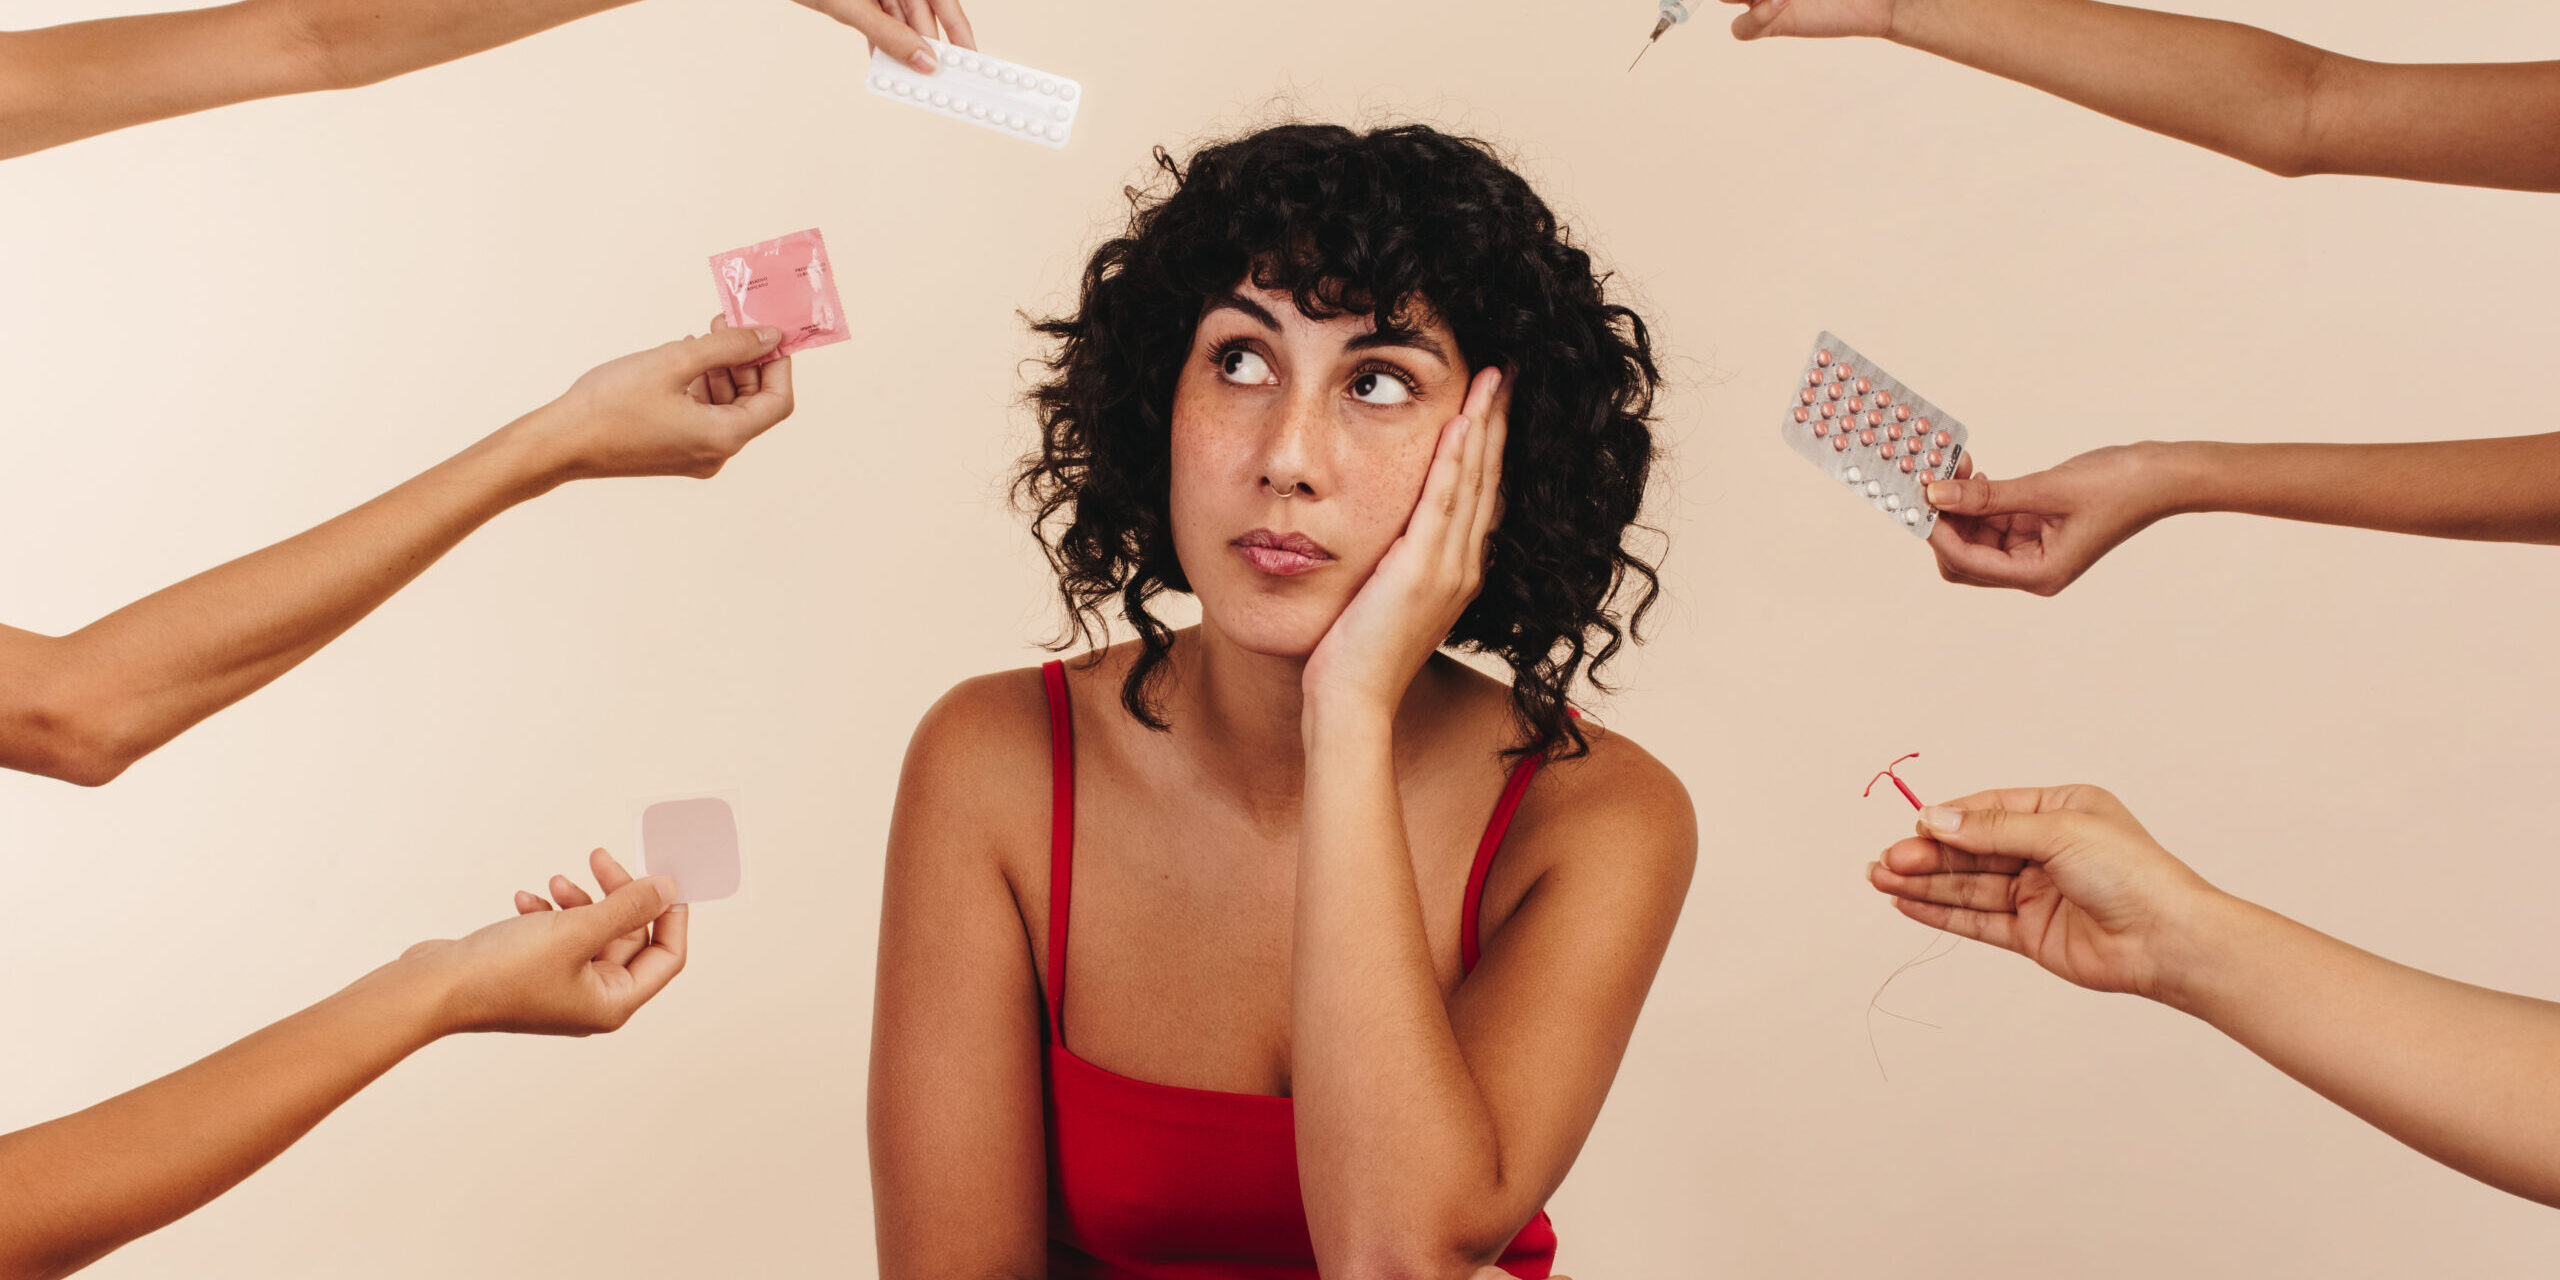 Young woman looking away thoughtfully while surrounded by hands holding different forms of hormonal and non-hormonal contraception. Pensive young woman making a decision about her reproductive health.